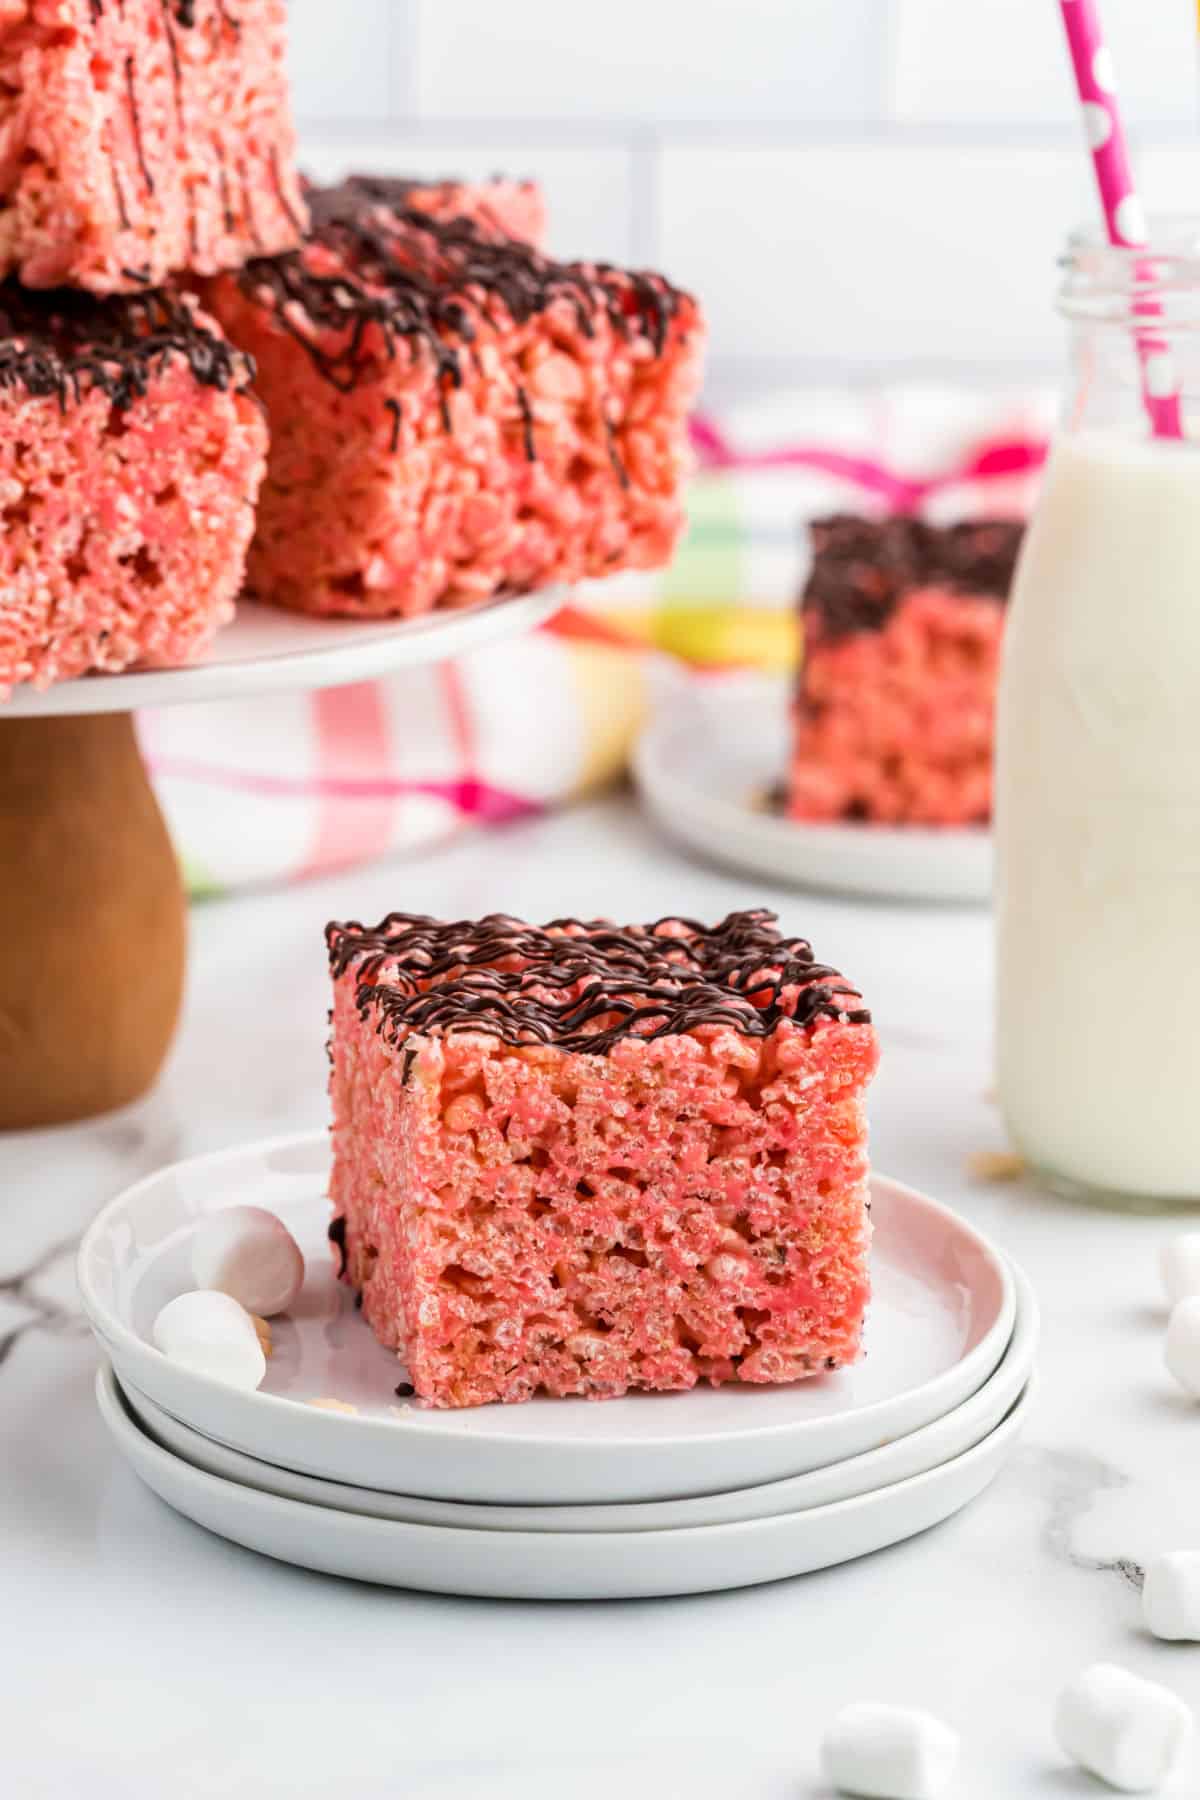 Cherry rice krispie treats cut into squares and drizzled with chocolate.